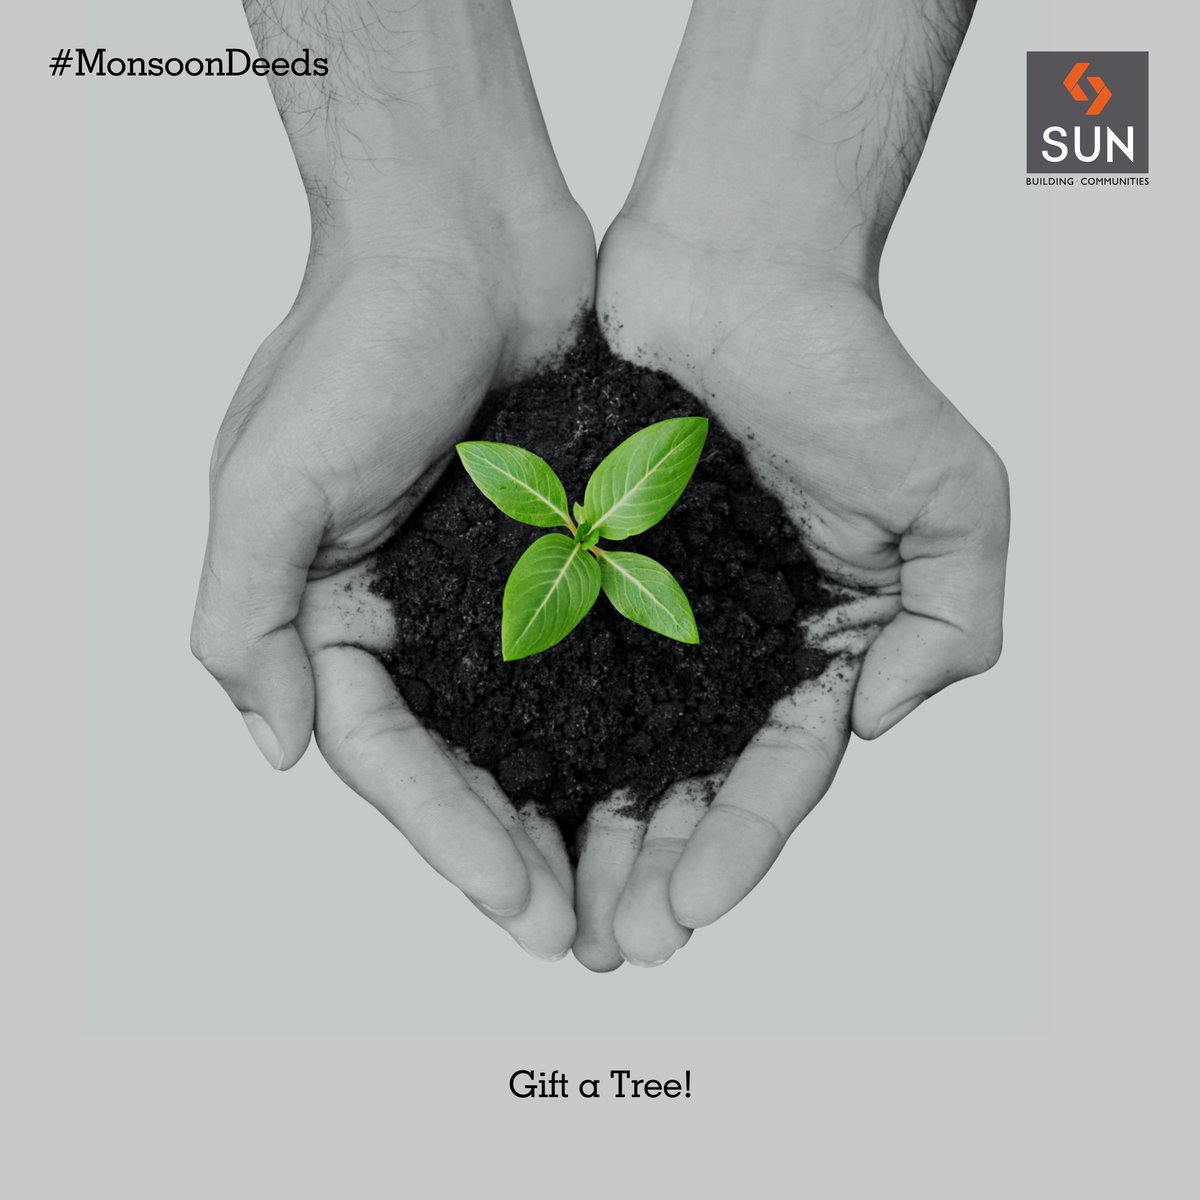 #MonsoonDeeds 
Turn our Earth more green, plant more greens during monsoon. https://t.co/bQl6Cku9VJ